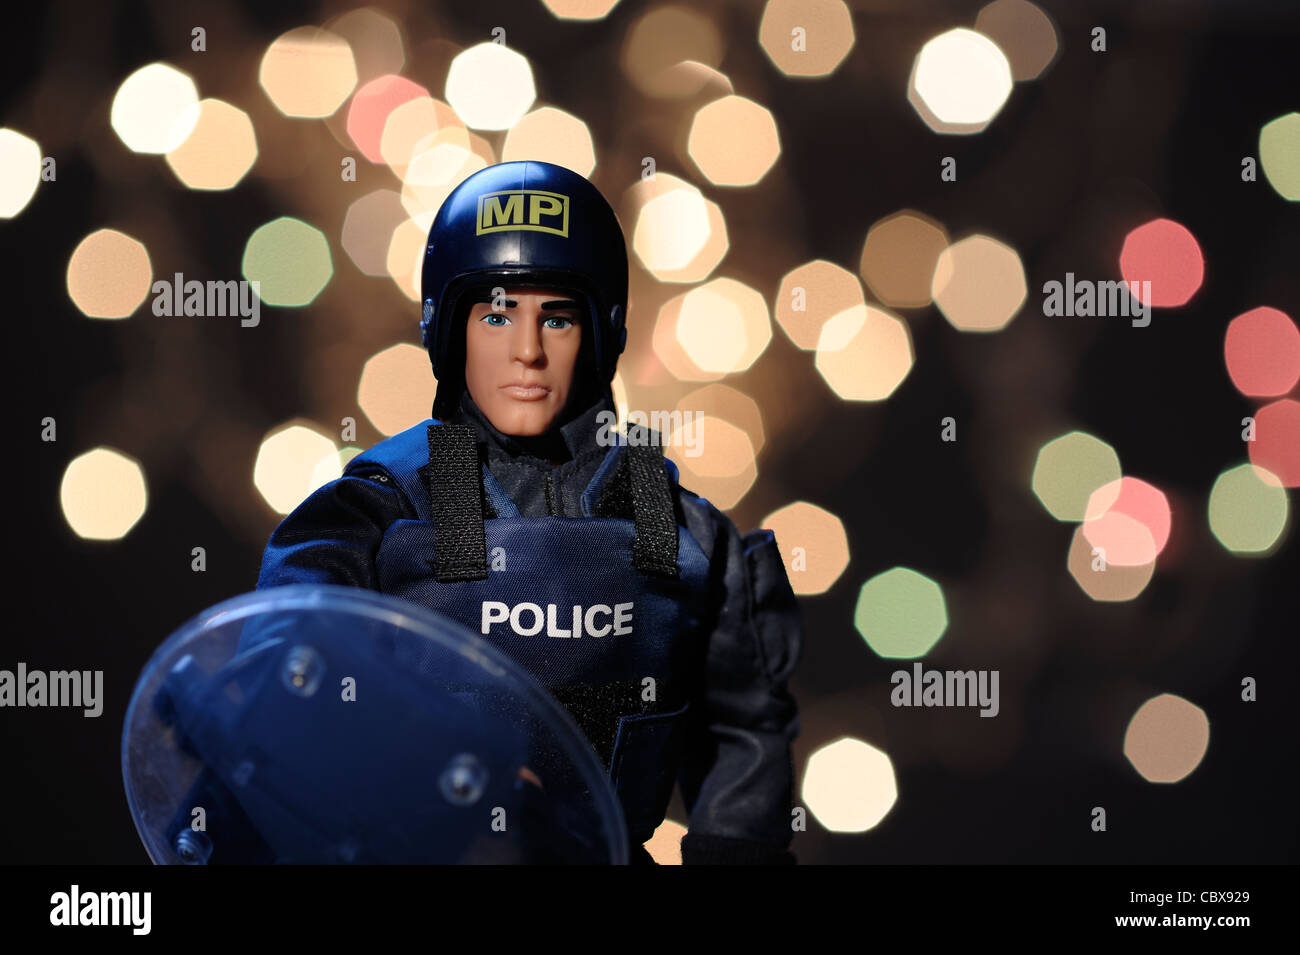 Policeman in riot gear Stock Photo